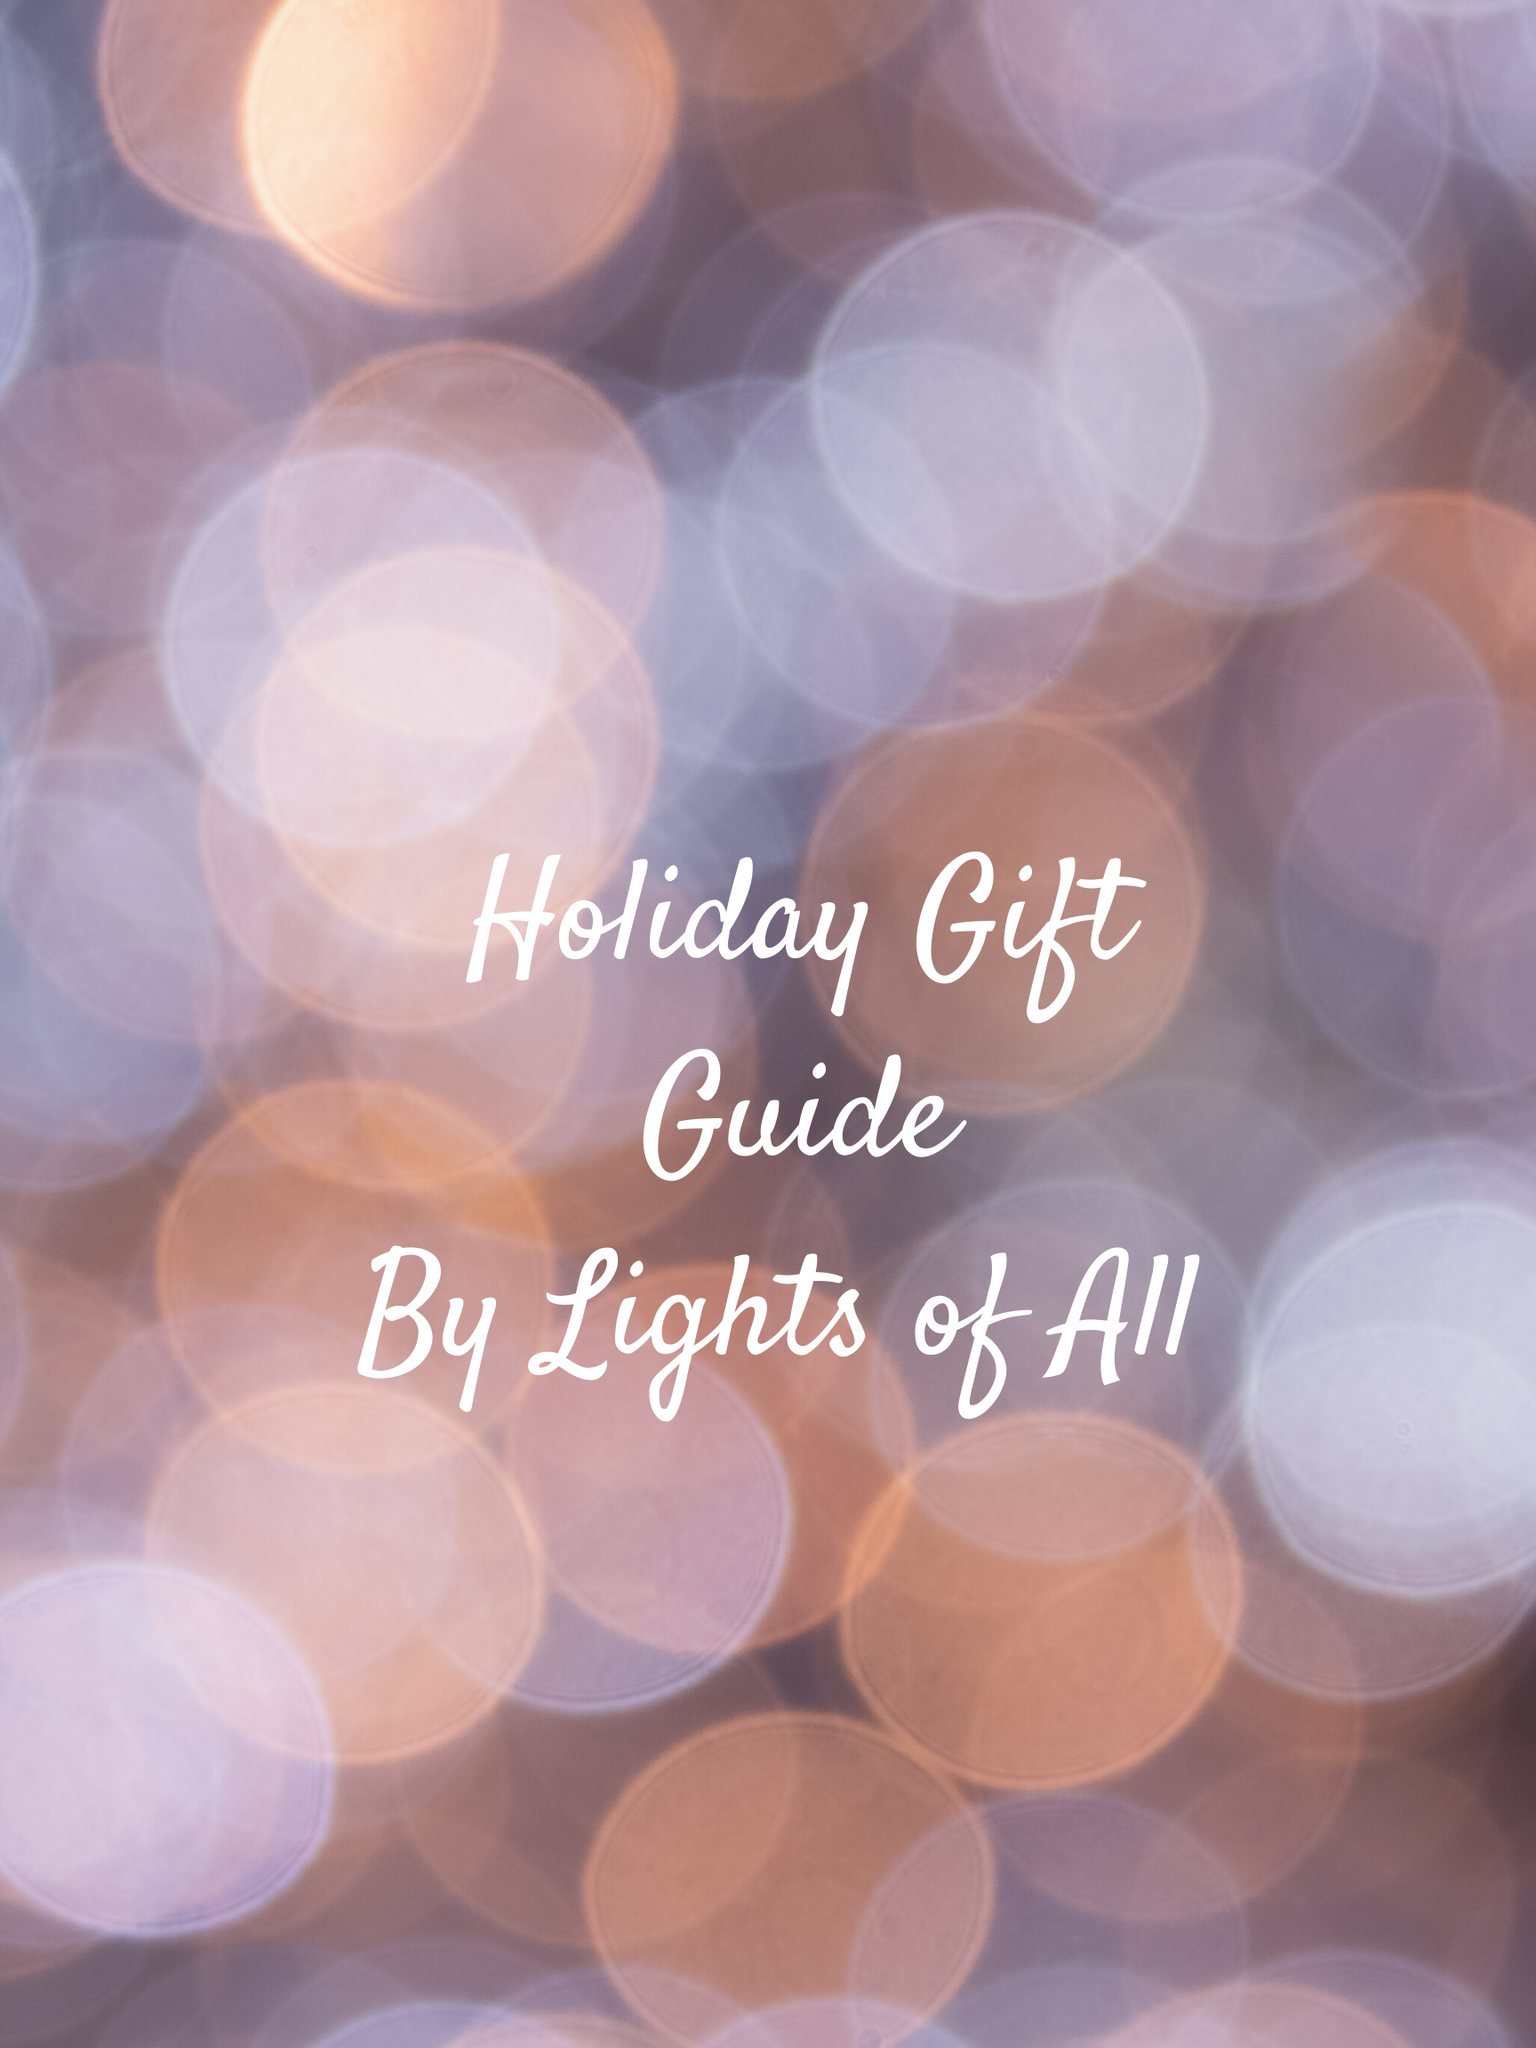 Your LOA Holiday Gift Guide!